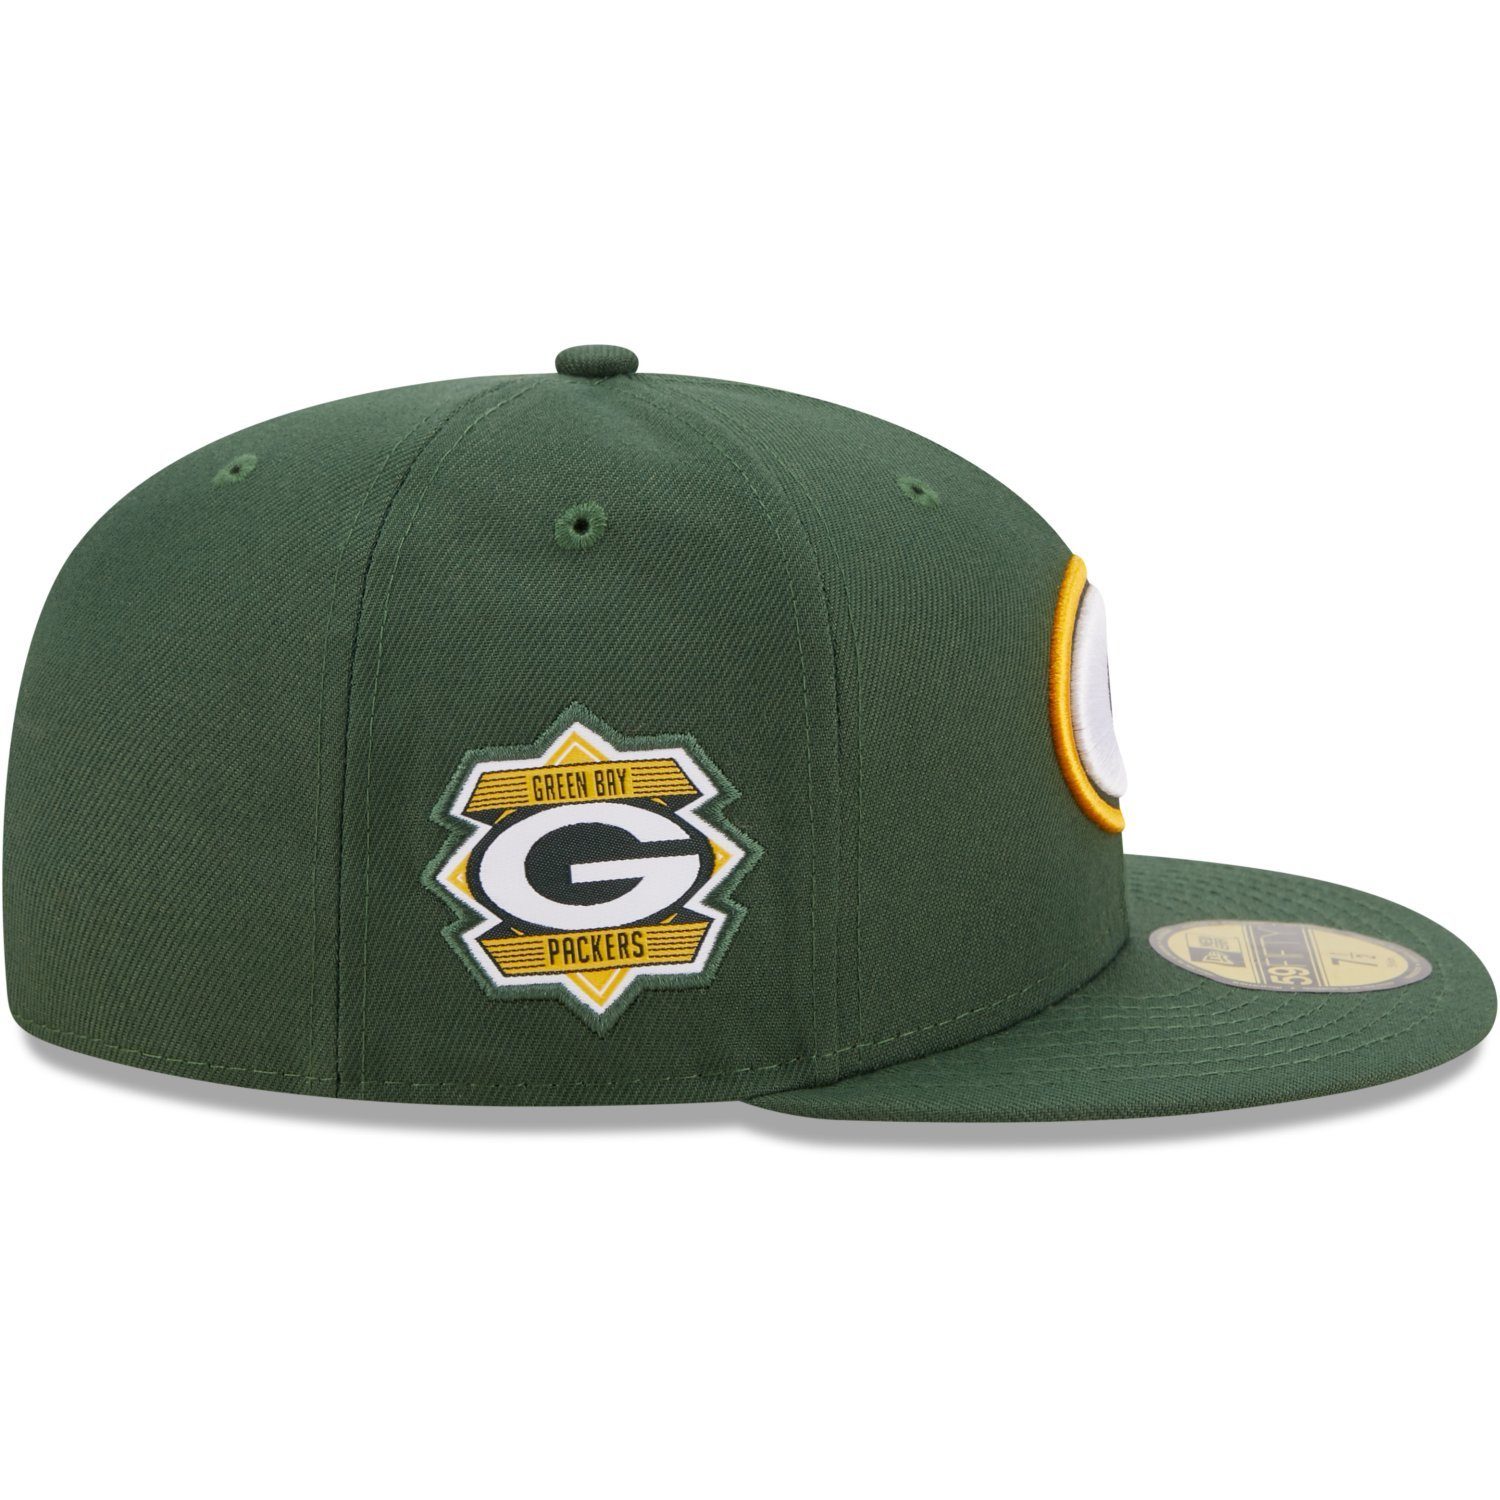 Era Packers 59Fifty Bay SIDE PATCH Cap Fitted Green New